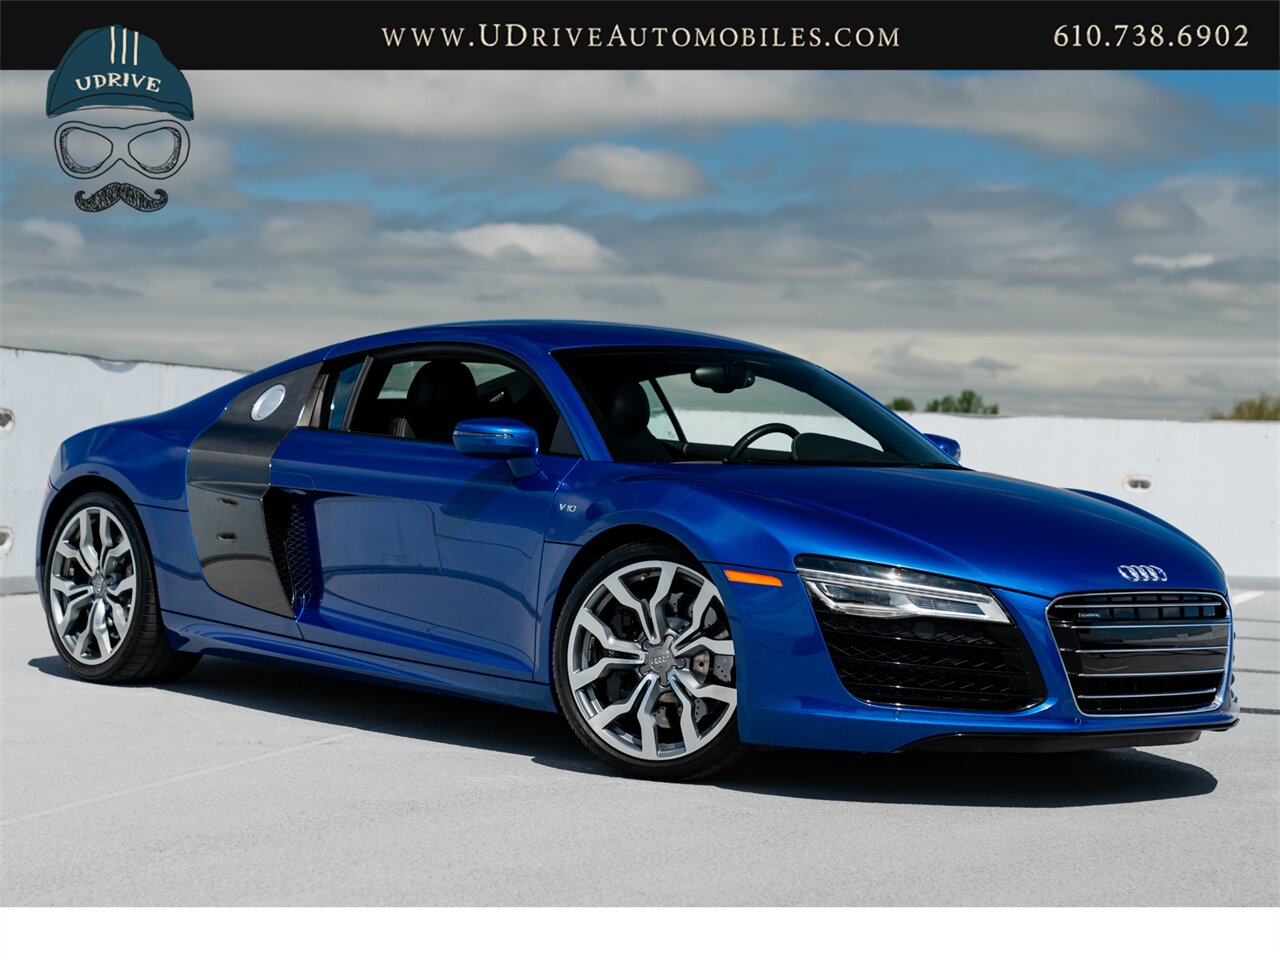 2015 Audi R8 5.2 V10 Quattro 6 Speed Manual 10k Miles  Diamond Stitched Leather 1 of 2 - Photo 3 - West Chester, PA 19382